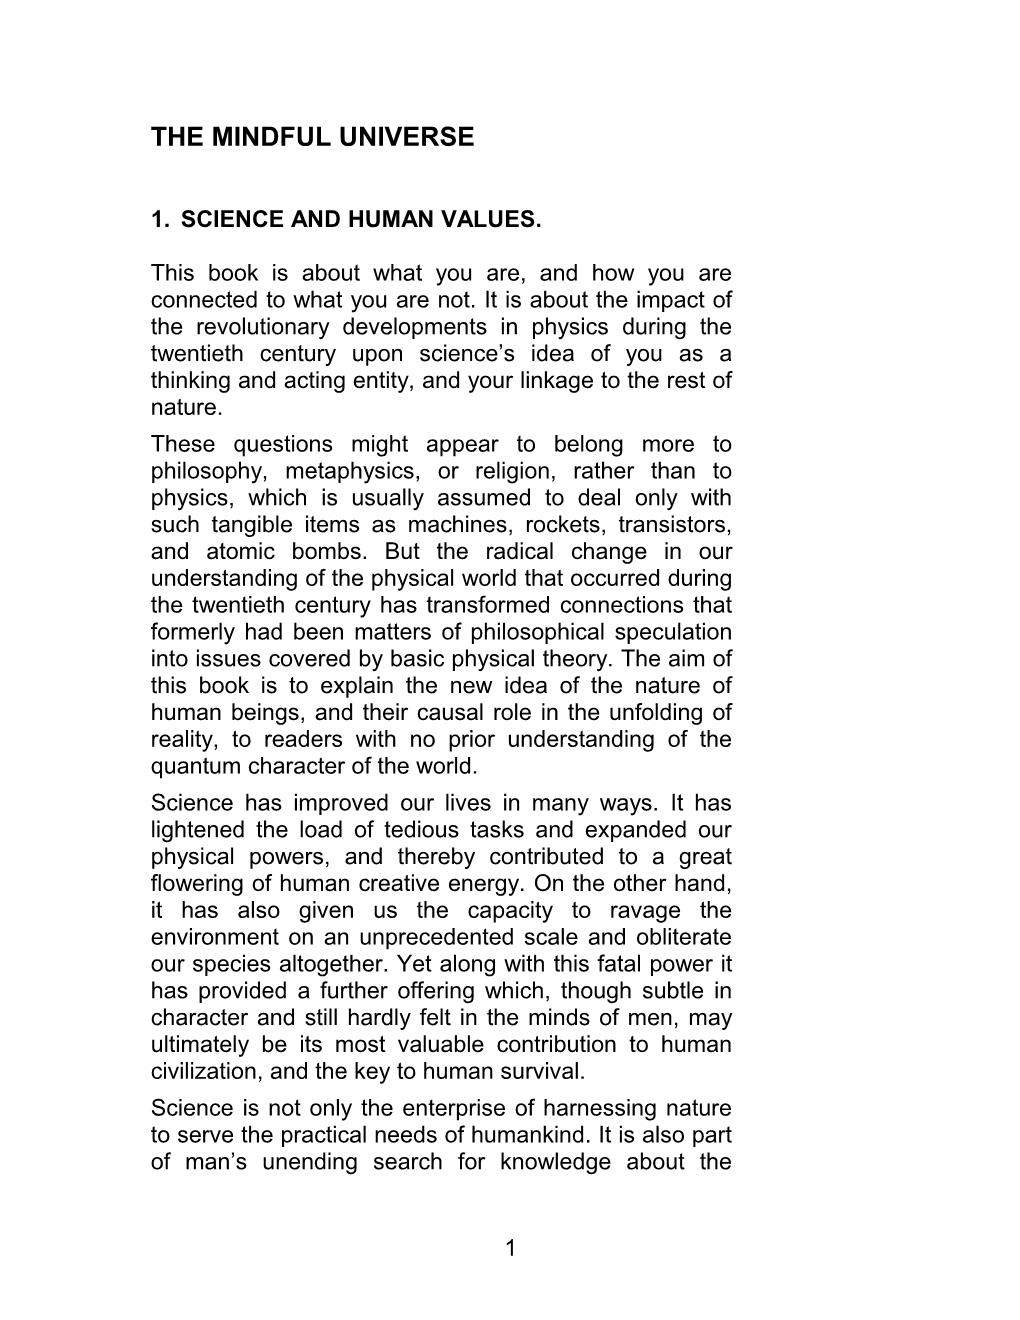 1.Science and Human Values